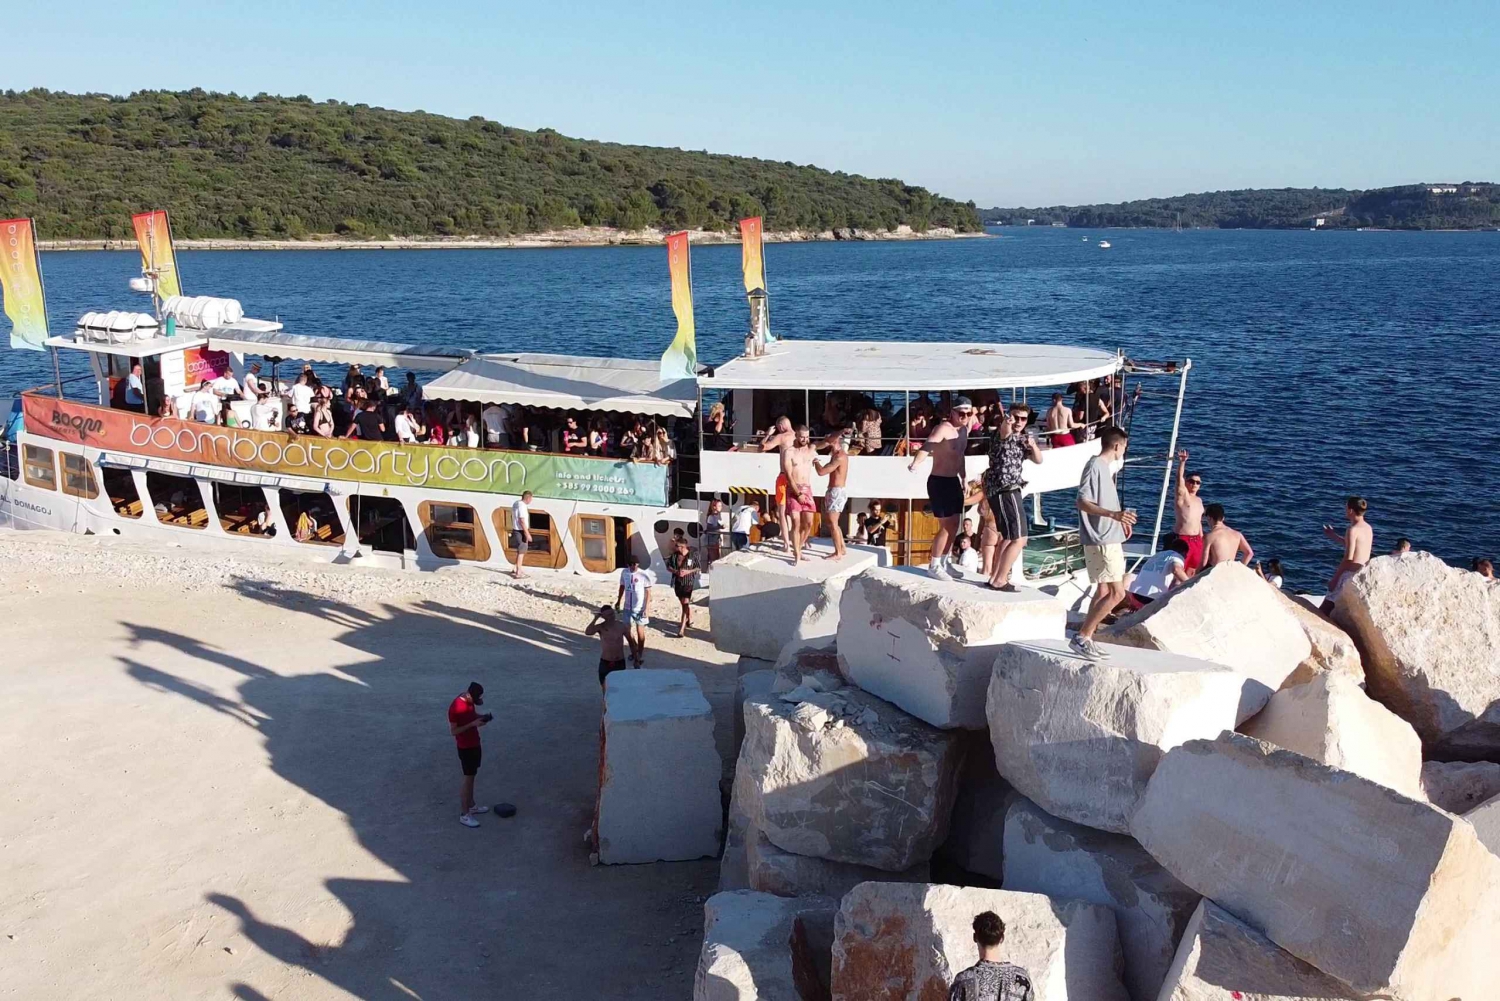 Poreč: Boat Party with transfer from Pula